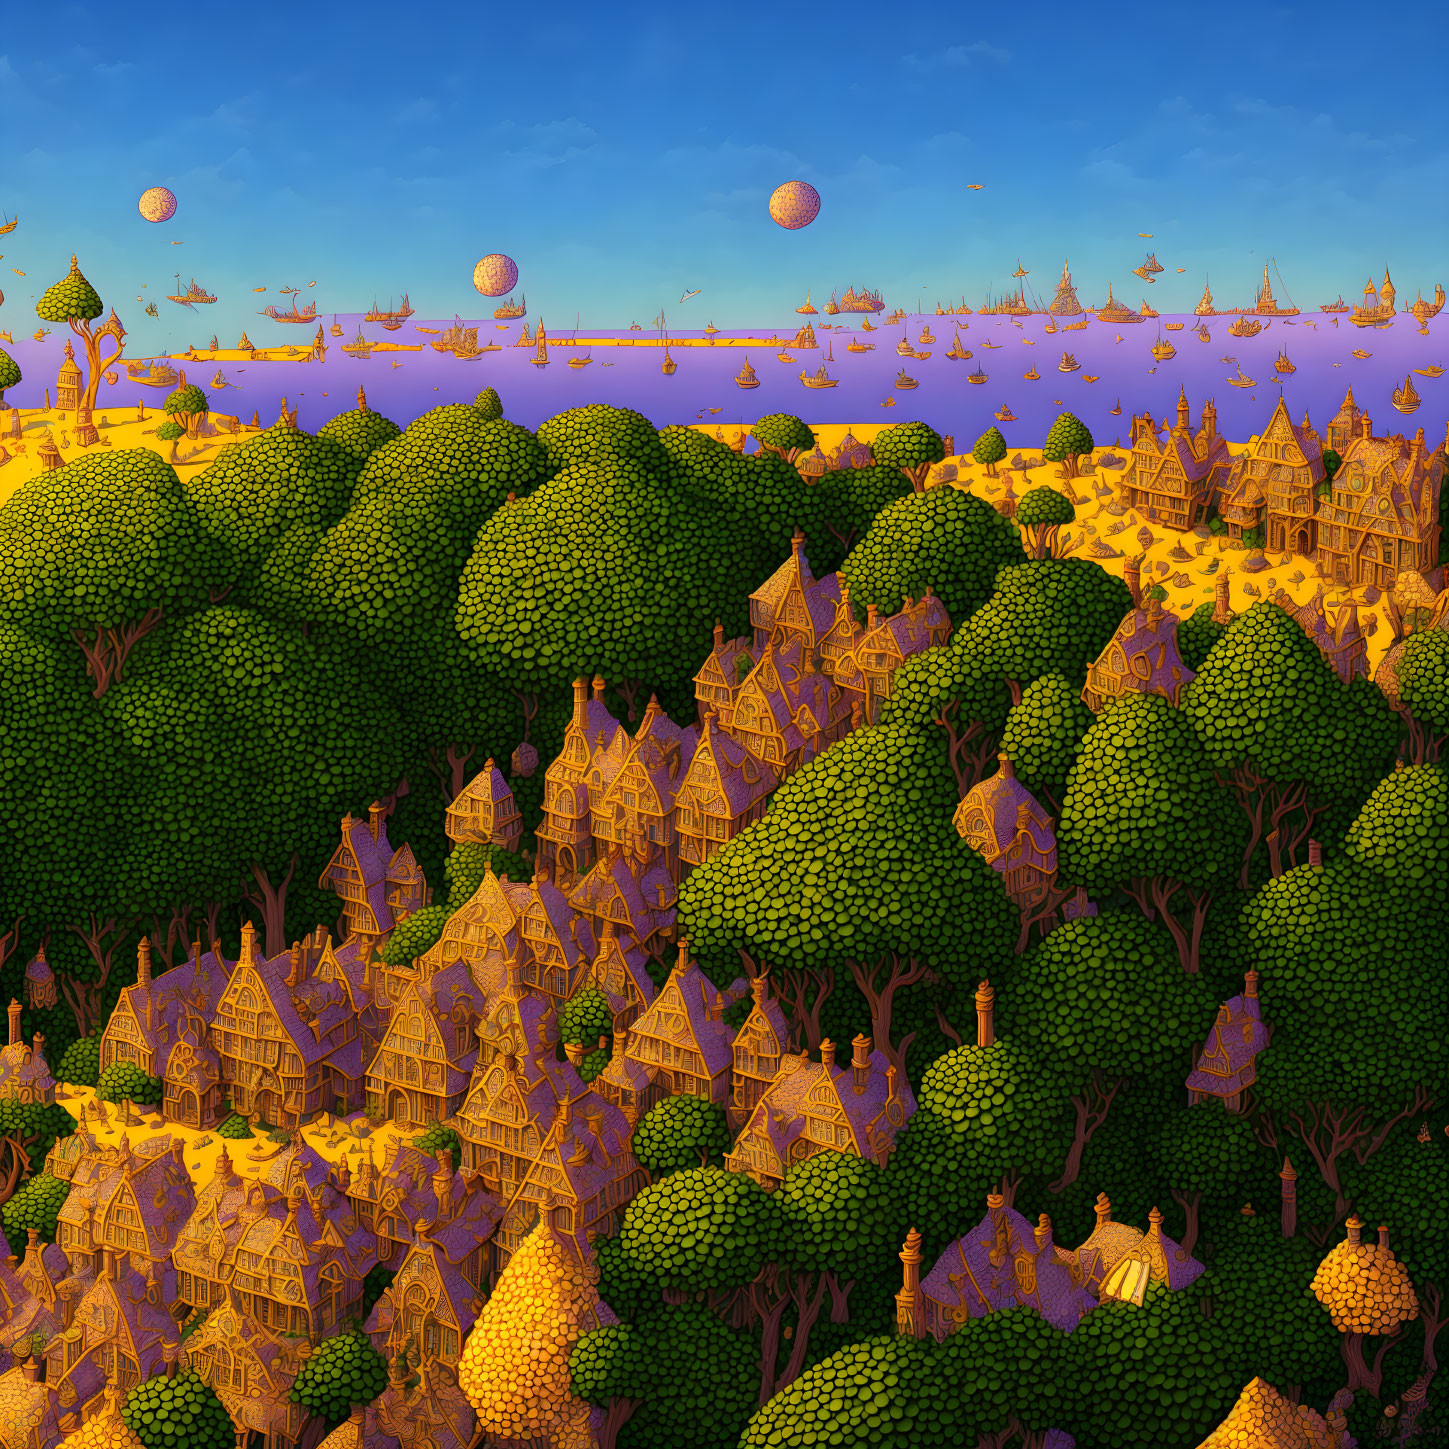 Whimsical landscape with green treetops, golden houses, and floating islands